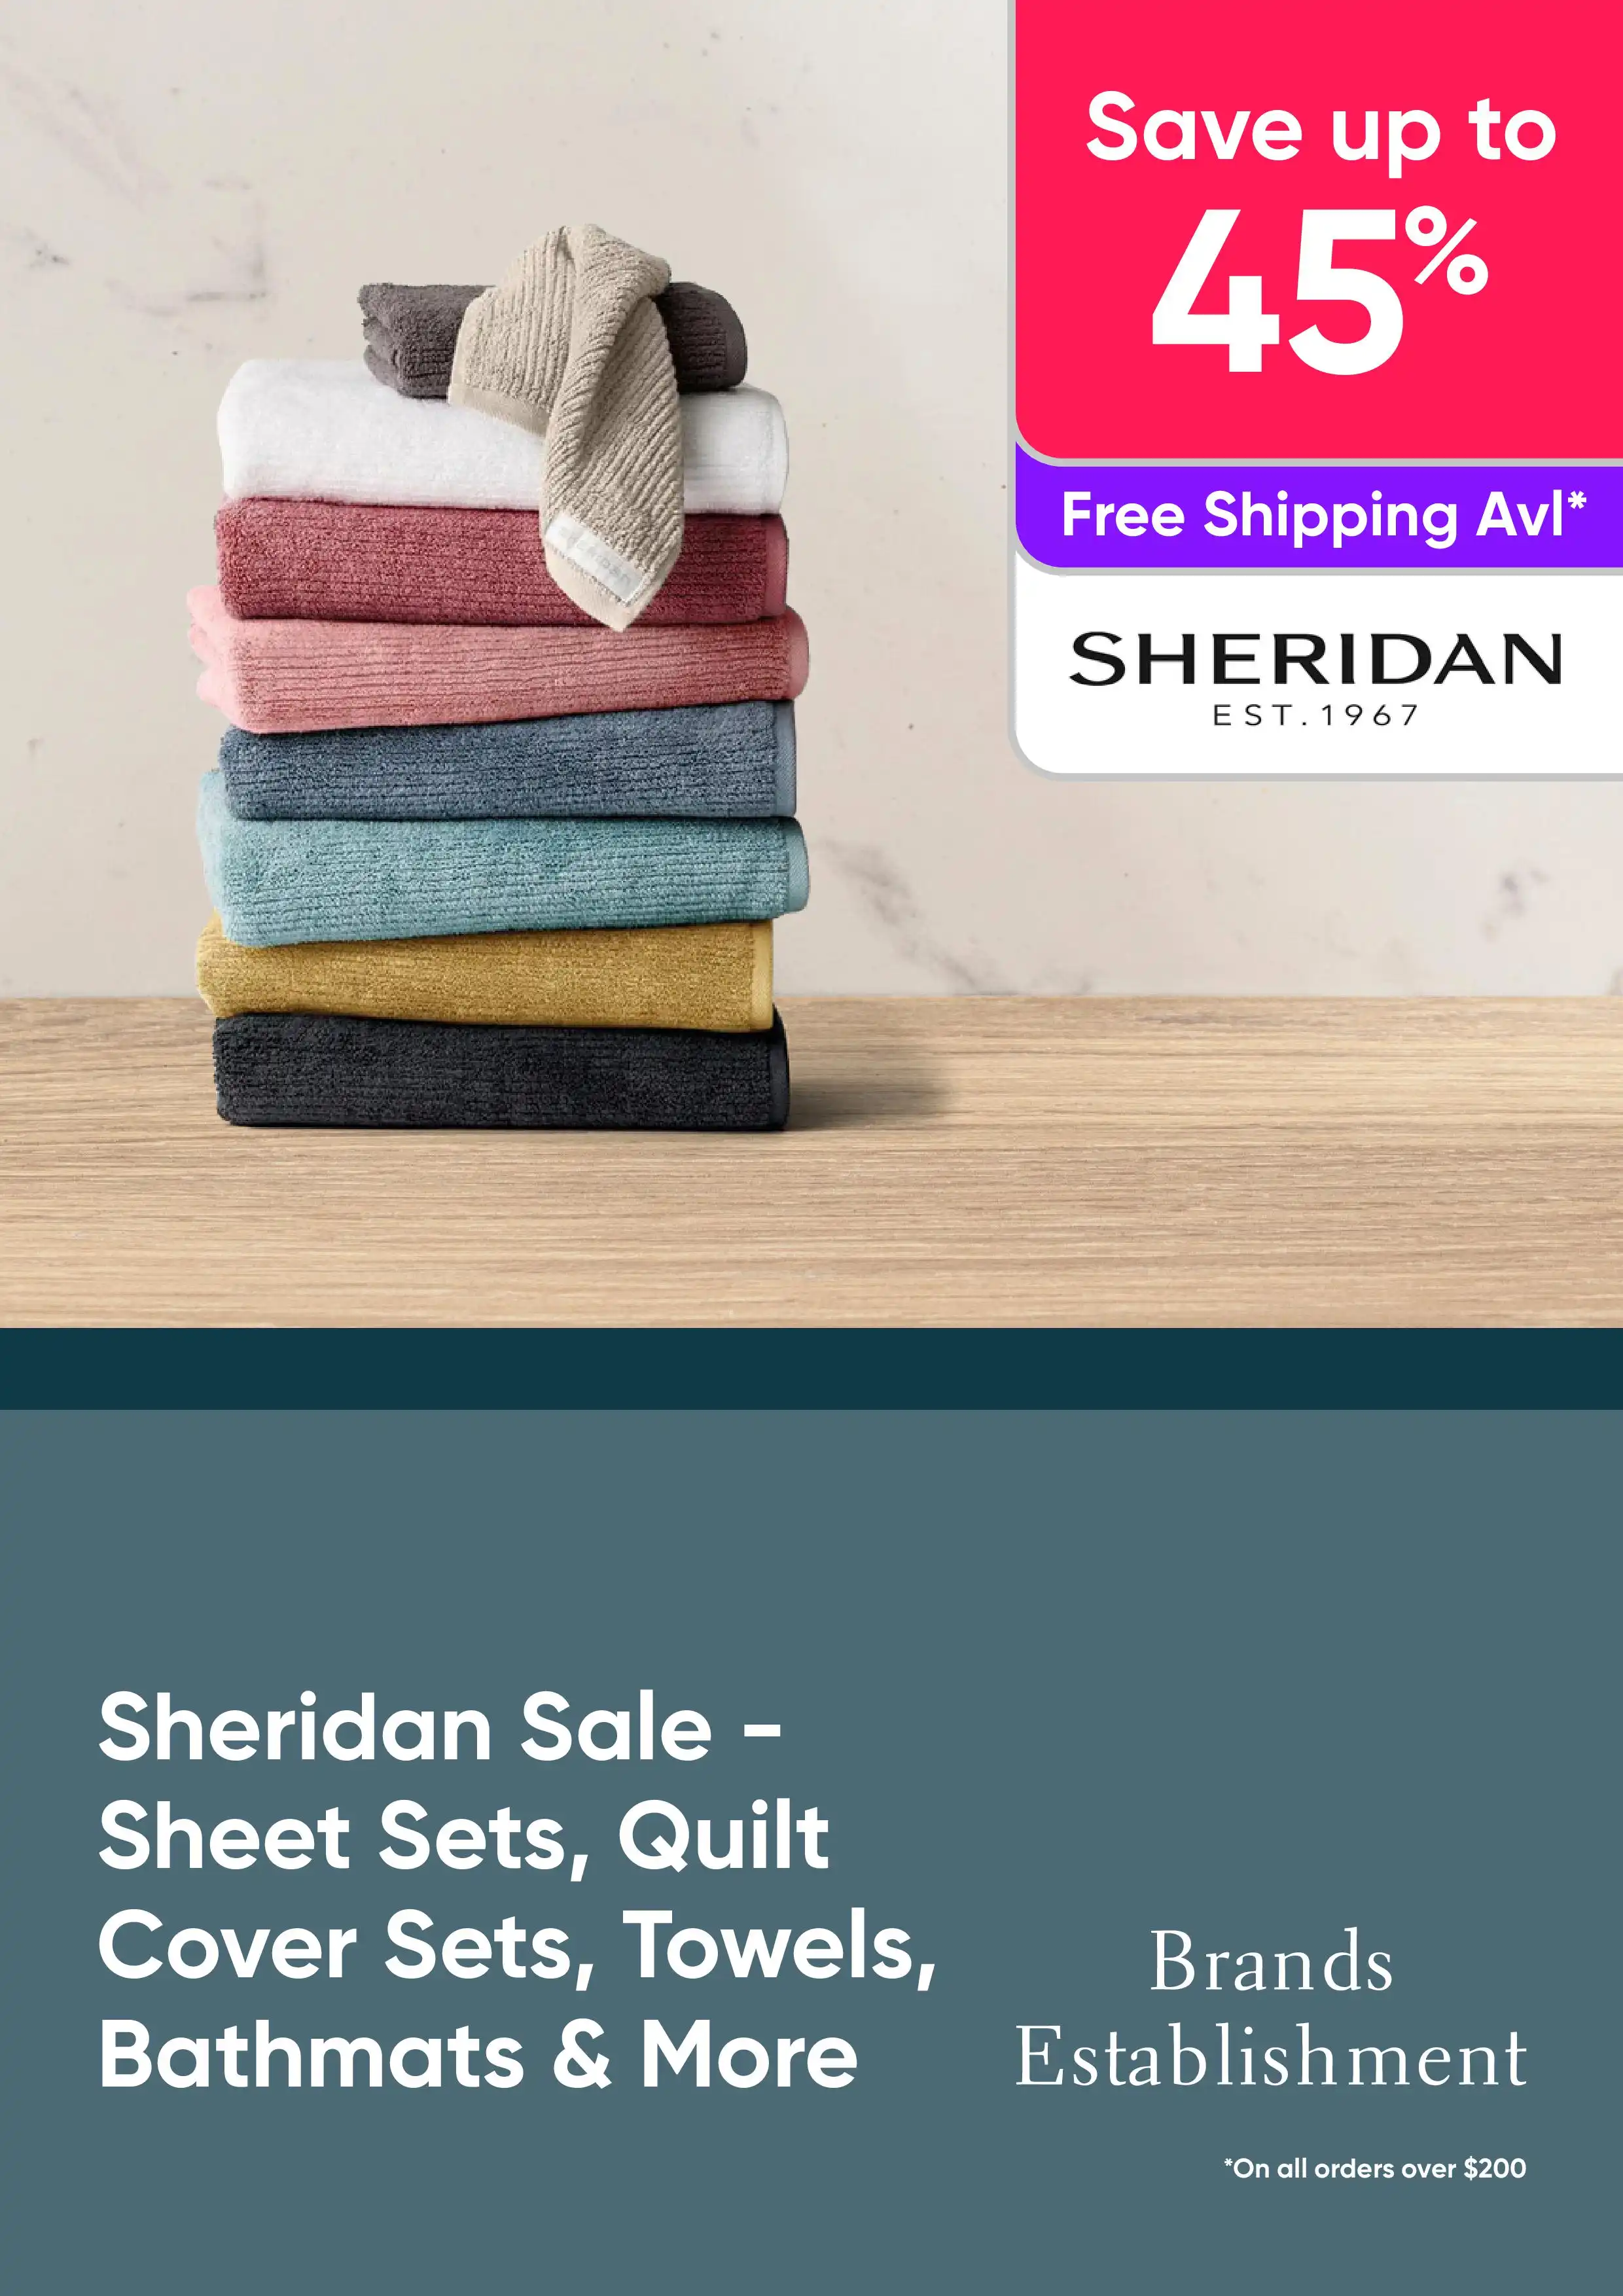 Sheridan Sale - Save up To 45% On Sheet Sets, Quilt Cover Sets, Towels, Bathmats & More